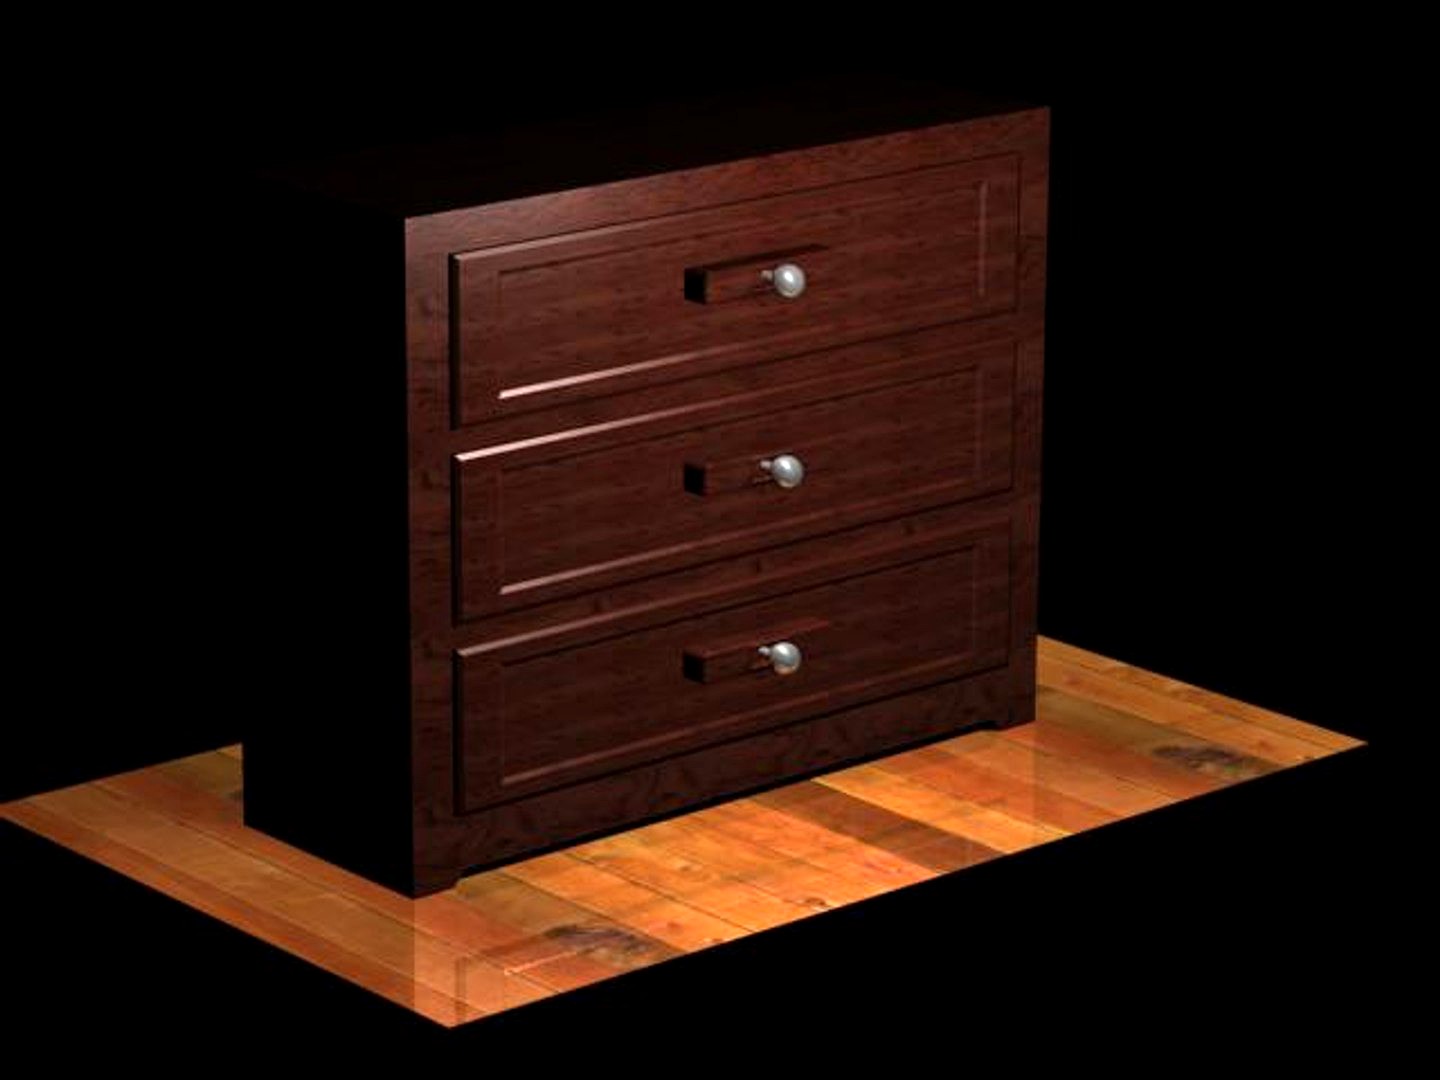 A Chest of Wooden Draws